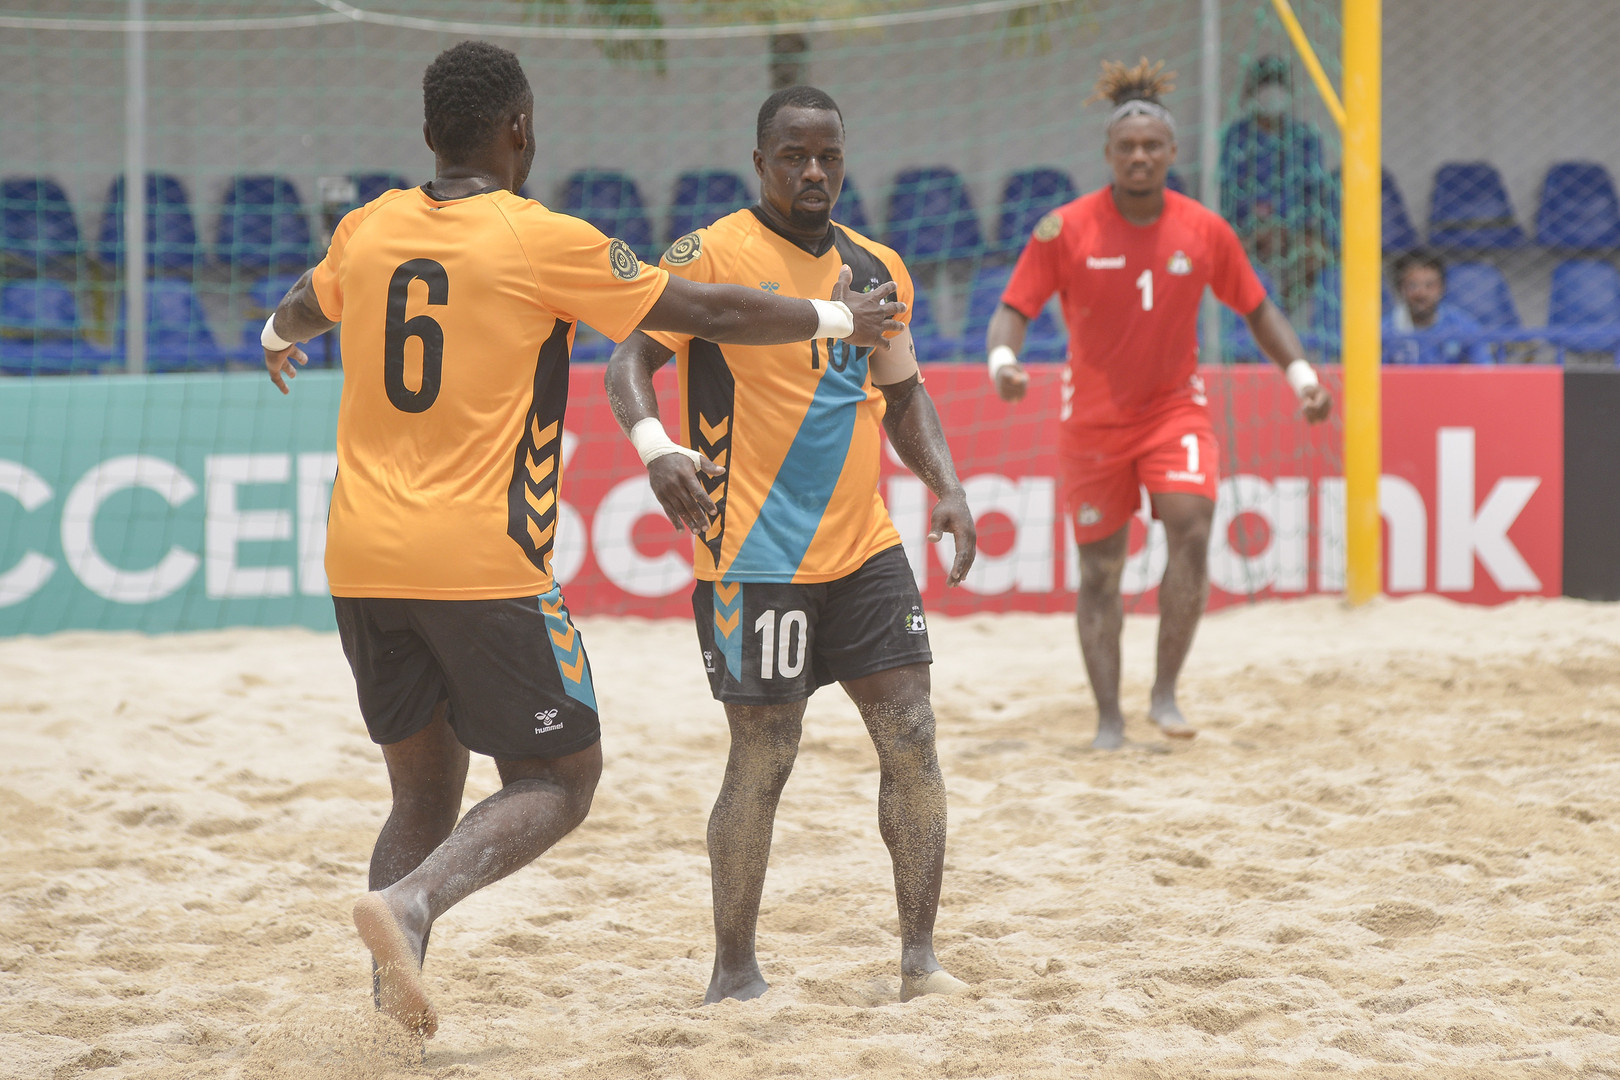 Lesly St Fleur scored five goals for the Bahamas as they beat the Dominican Republic 10-2 at the CONCACAF Beach Soccer Championship in Costa Rica ©CONCACAF